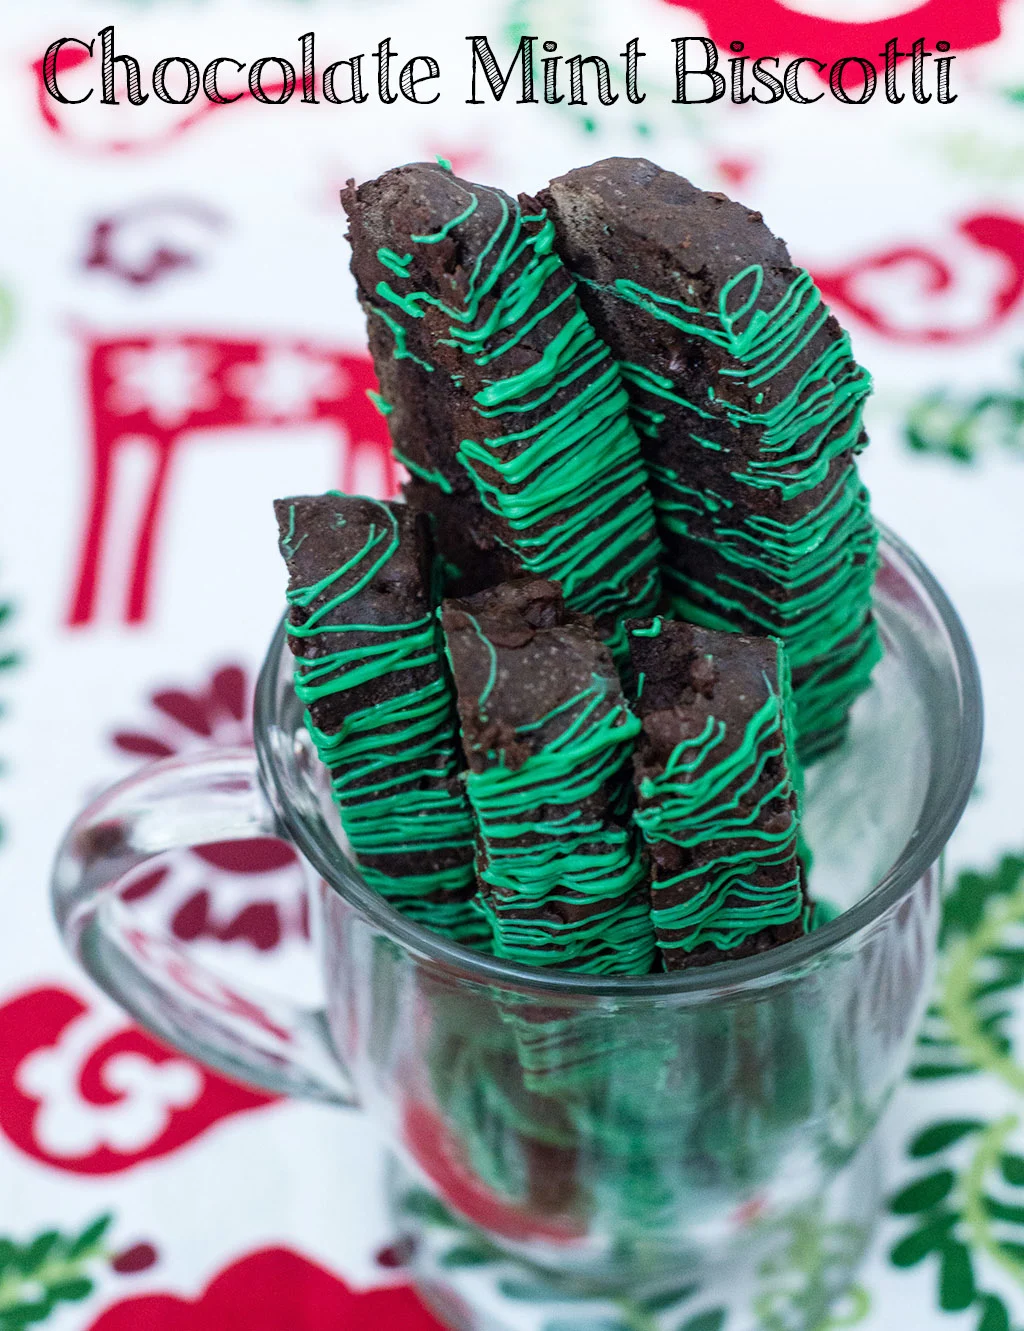 Italian-style chocolate mint biscotti is the perfect accompaniment for your afternoon cup of coffee! This cookie is flavored with dark chocolate cocoa powder and mint-flavored chocolate morsels. TheRedheadBaker.com #WhatsBaking